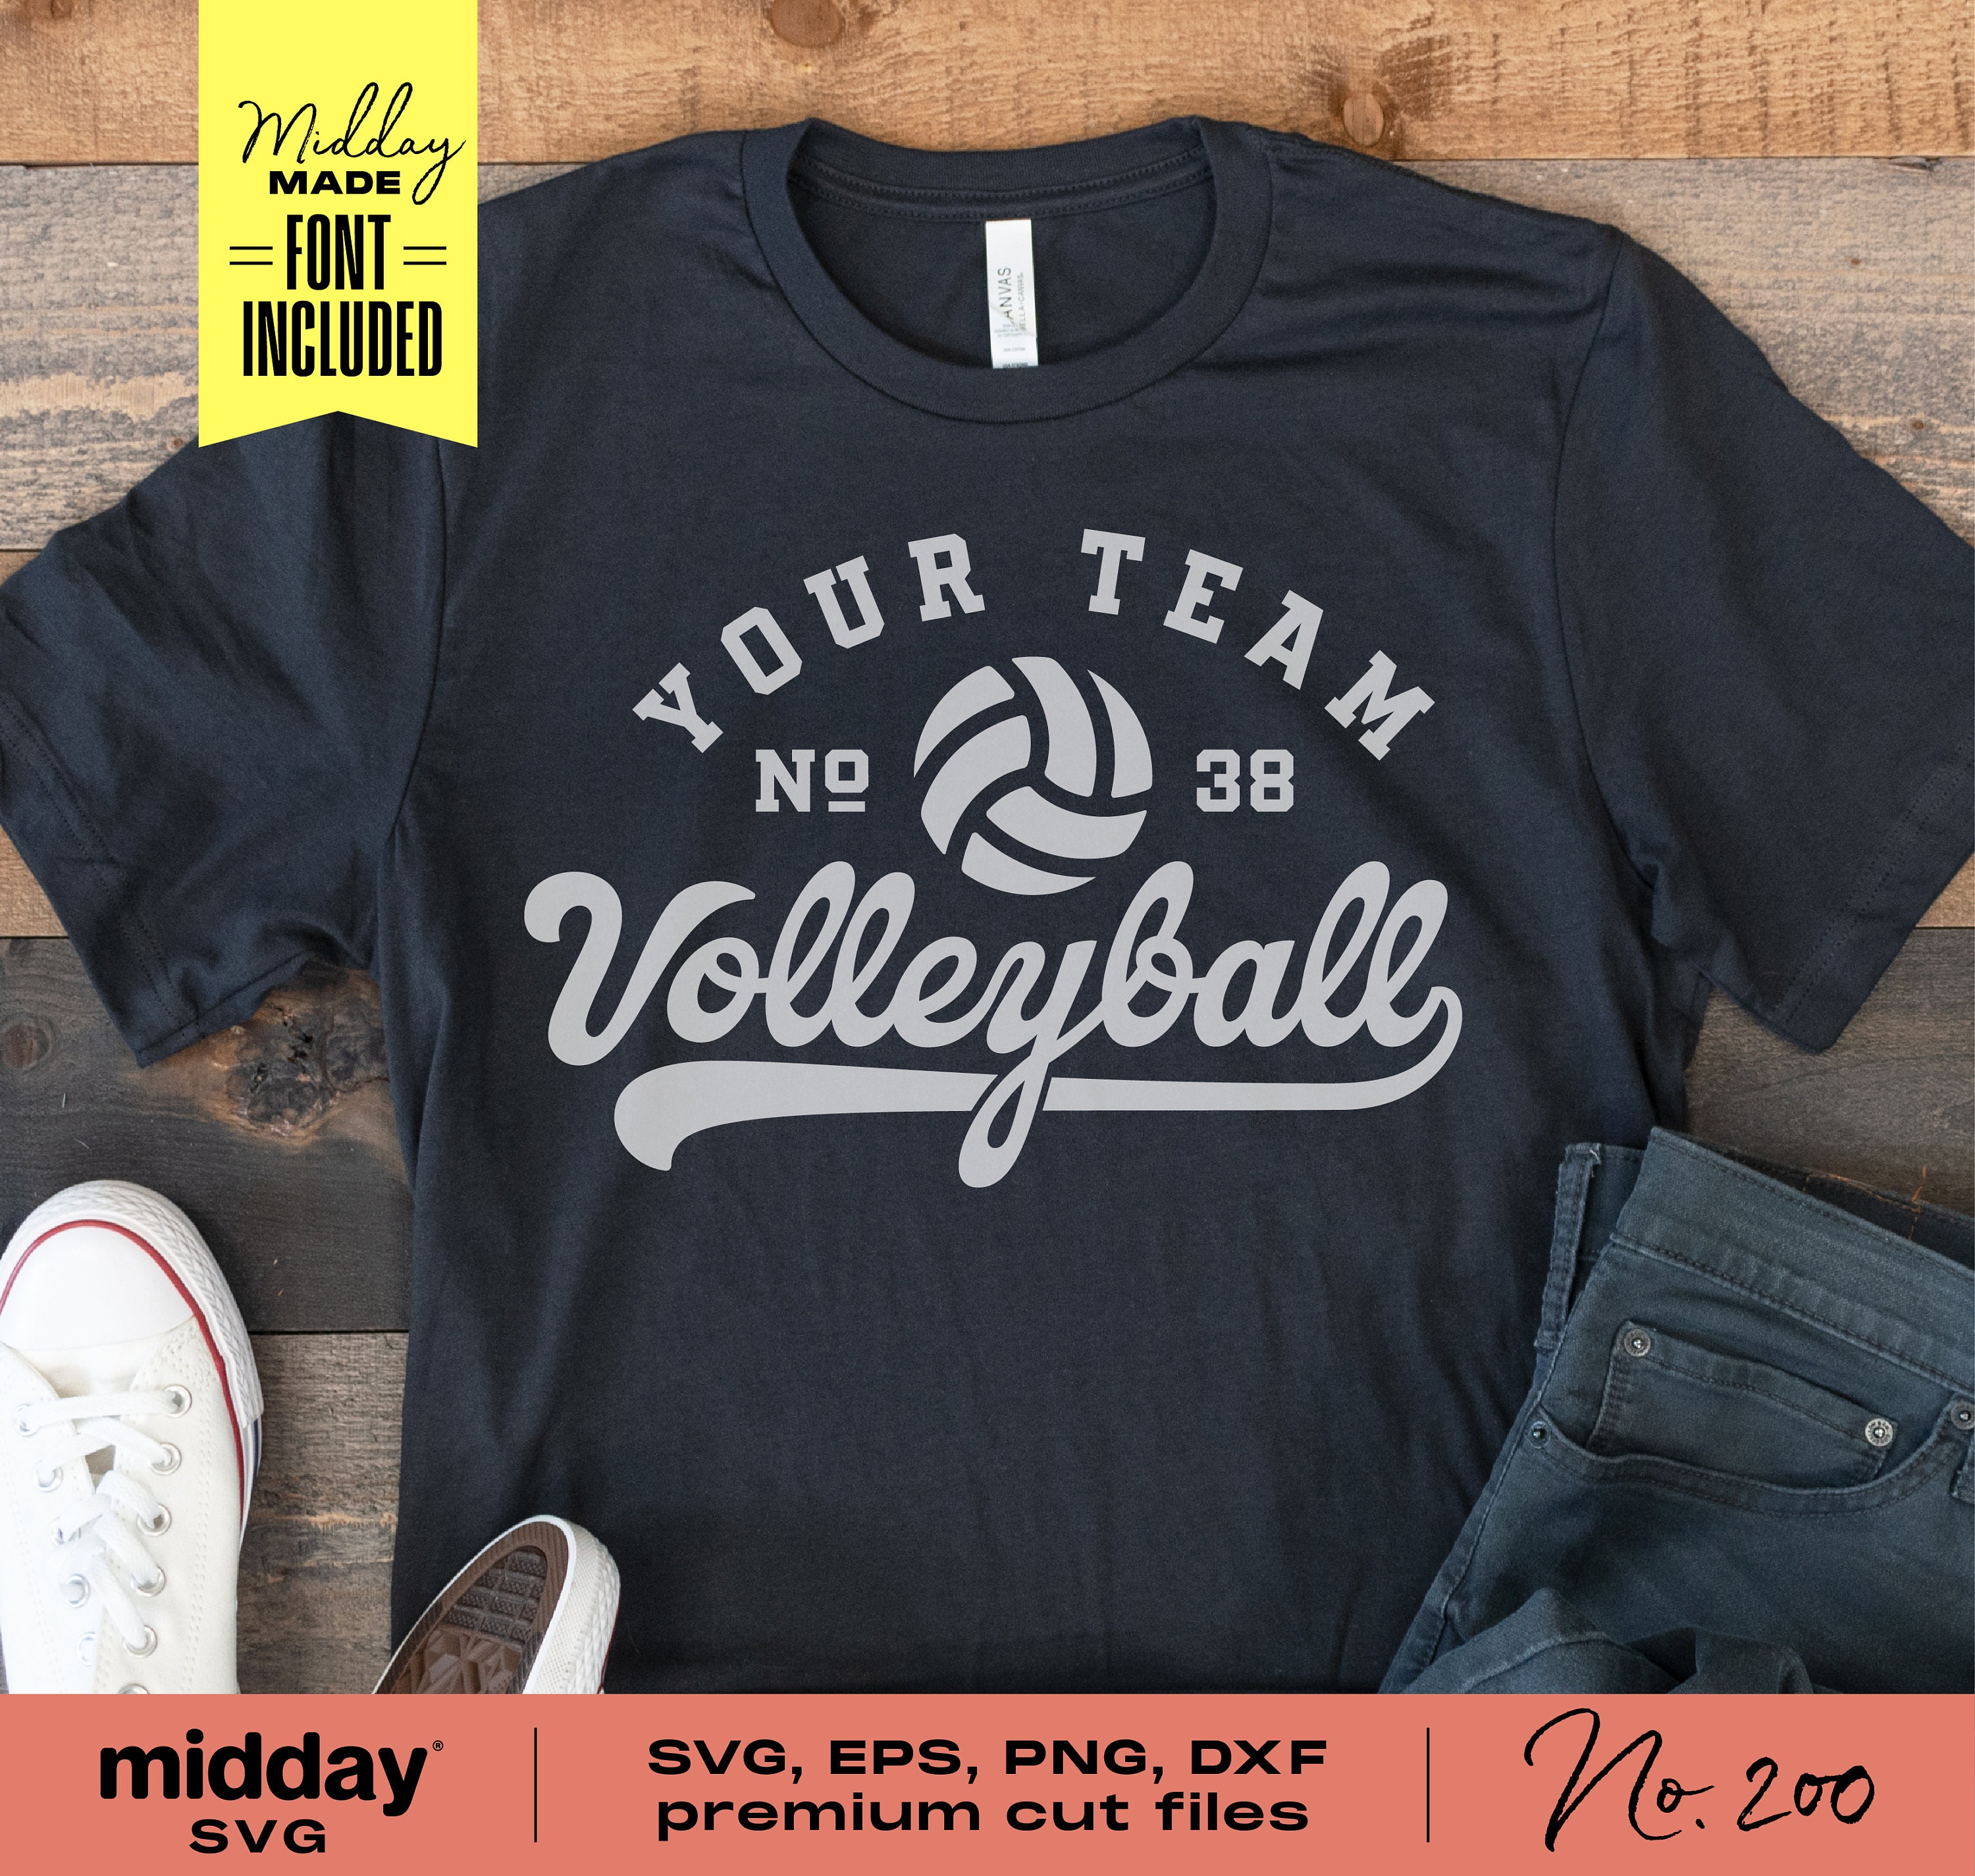 Volleyball Team Template Svg Png Dxf Eps Volleyball Team - Etsy